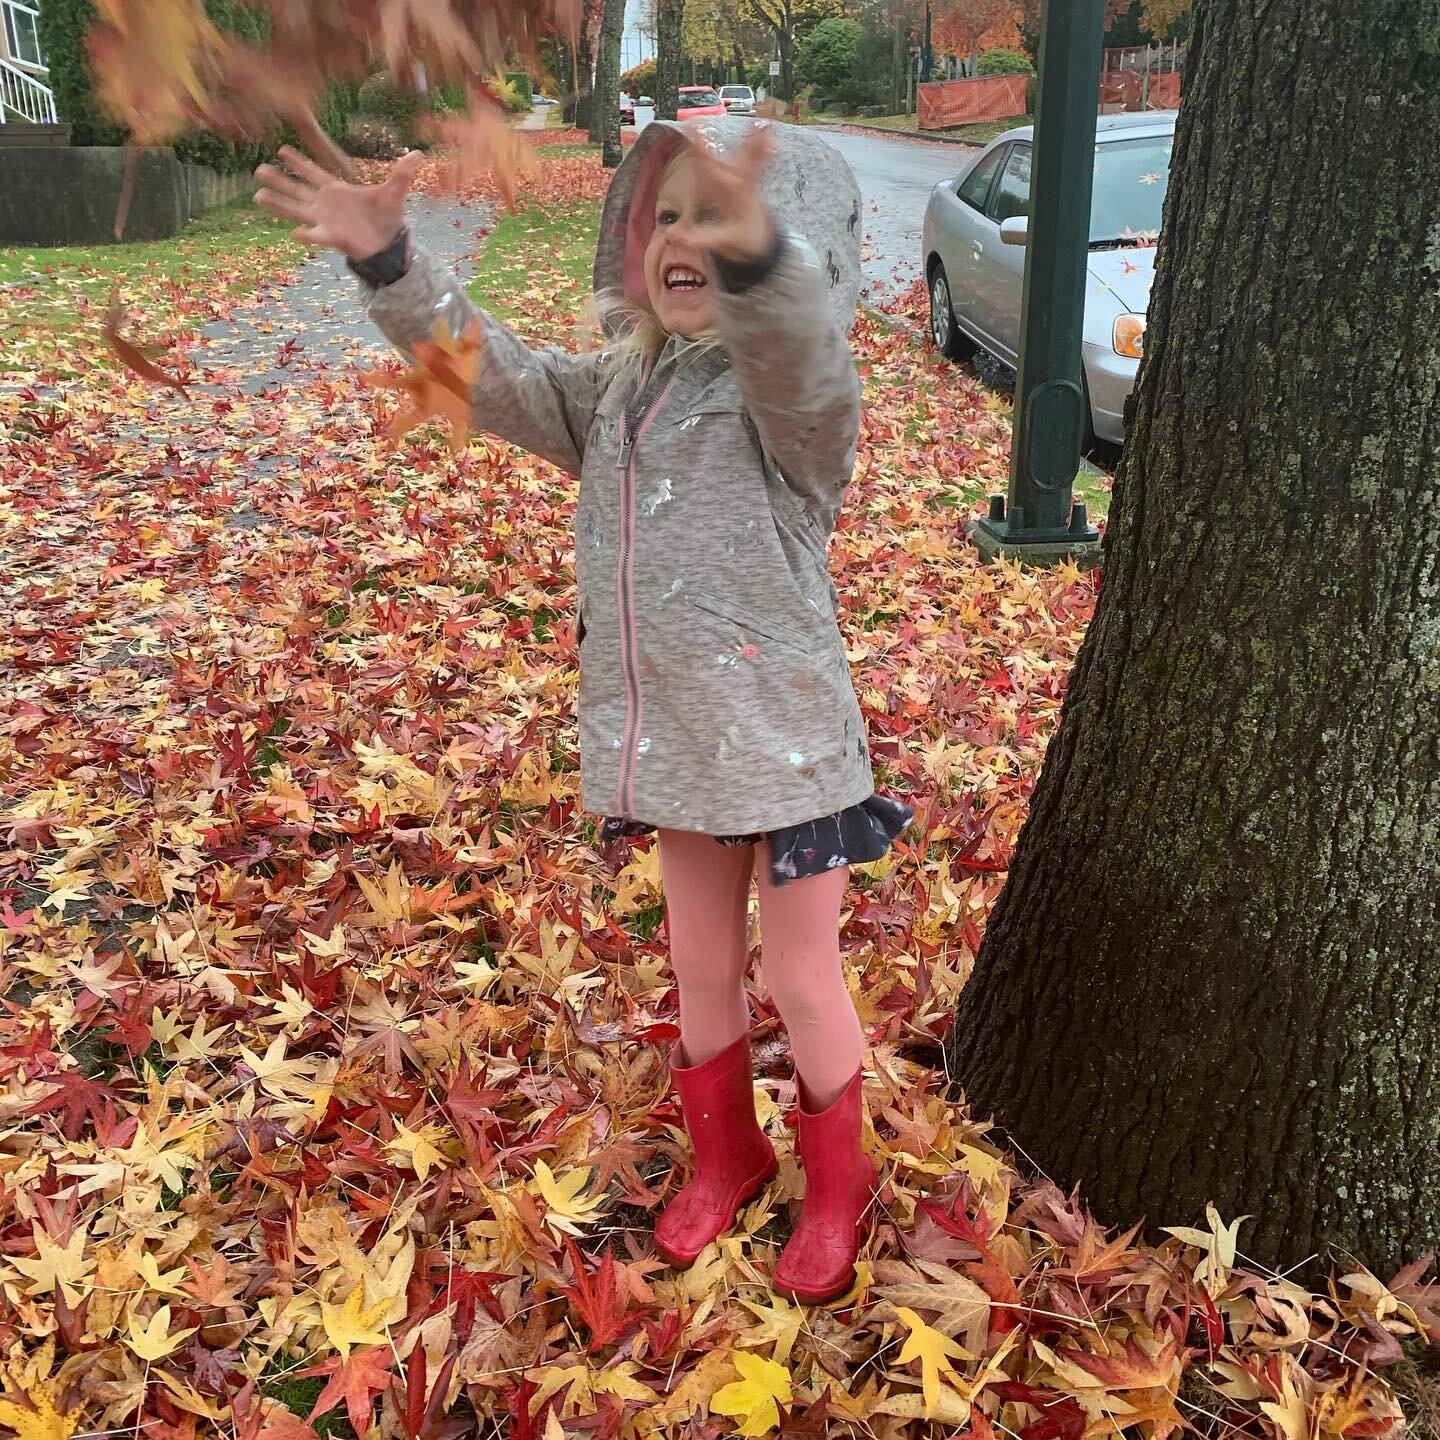 Fall magic... the seasons transition, just as we do. We can hide inside as we watch the leaves fall, or put on pink rubber rain boots and throw leaves in the air. Neither is bad or wrong. It&rsquo;s simply good to remember we always have a choice. 🧡